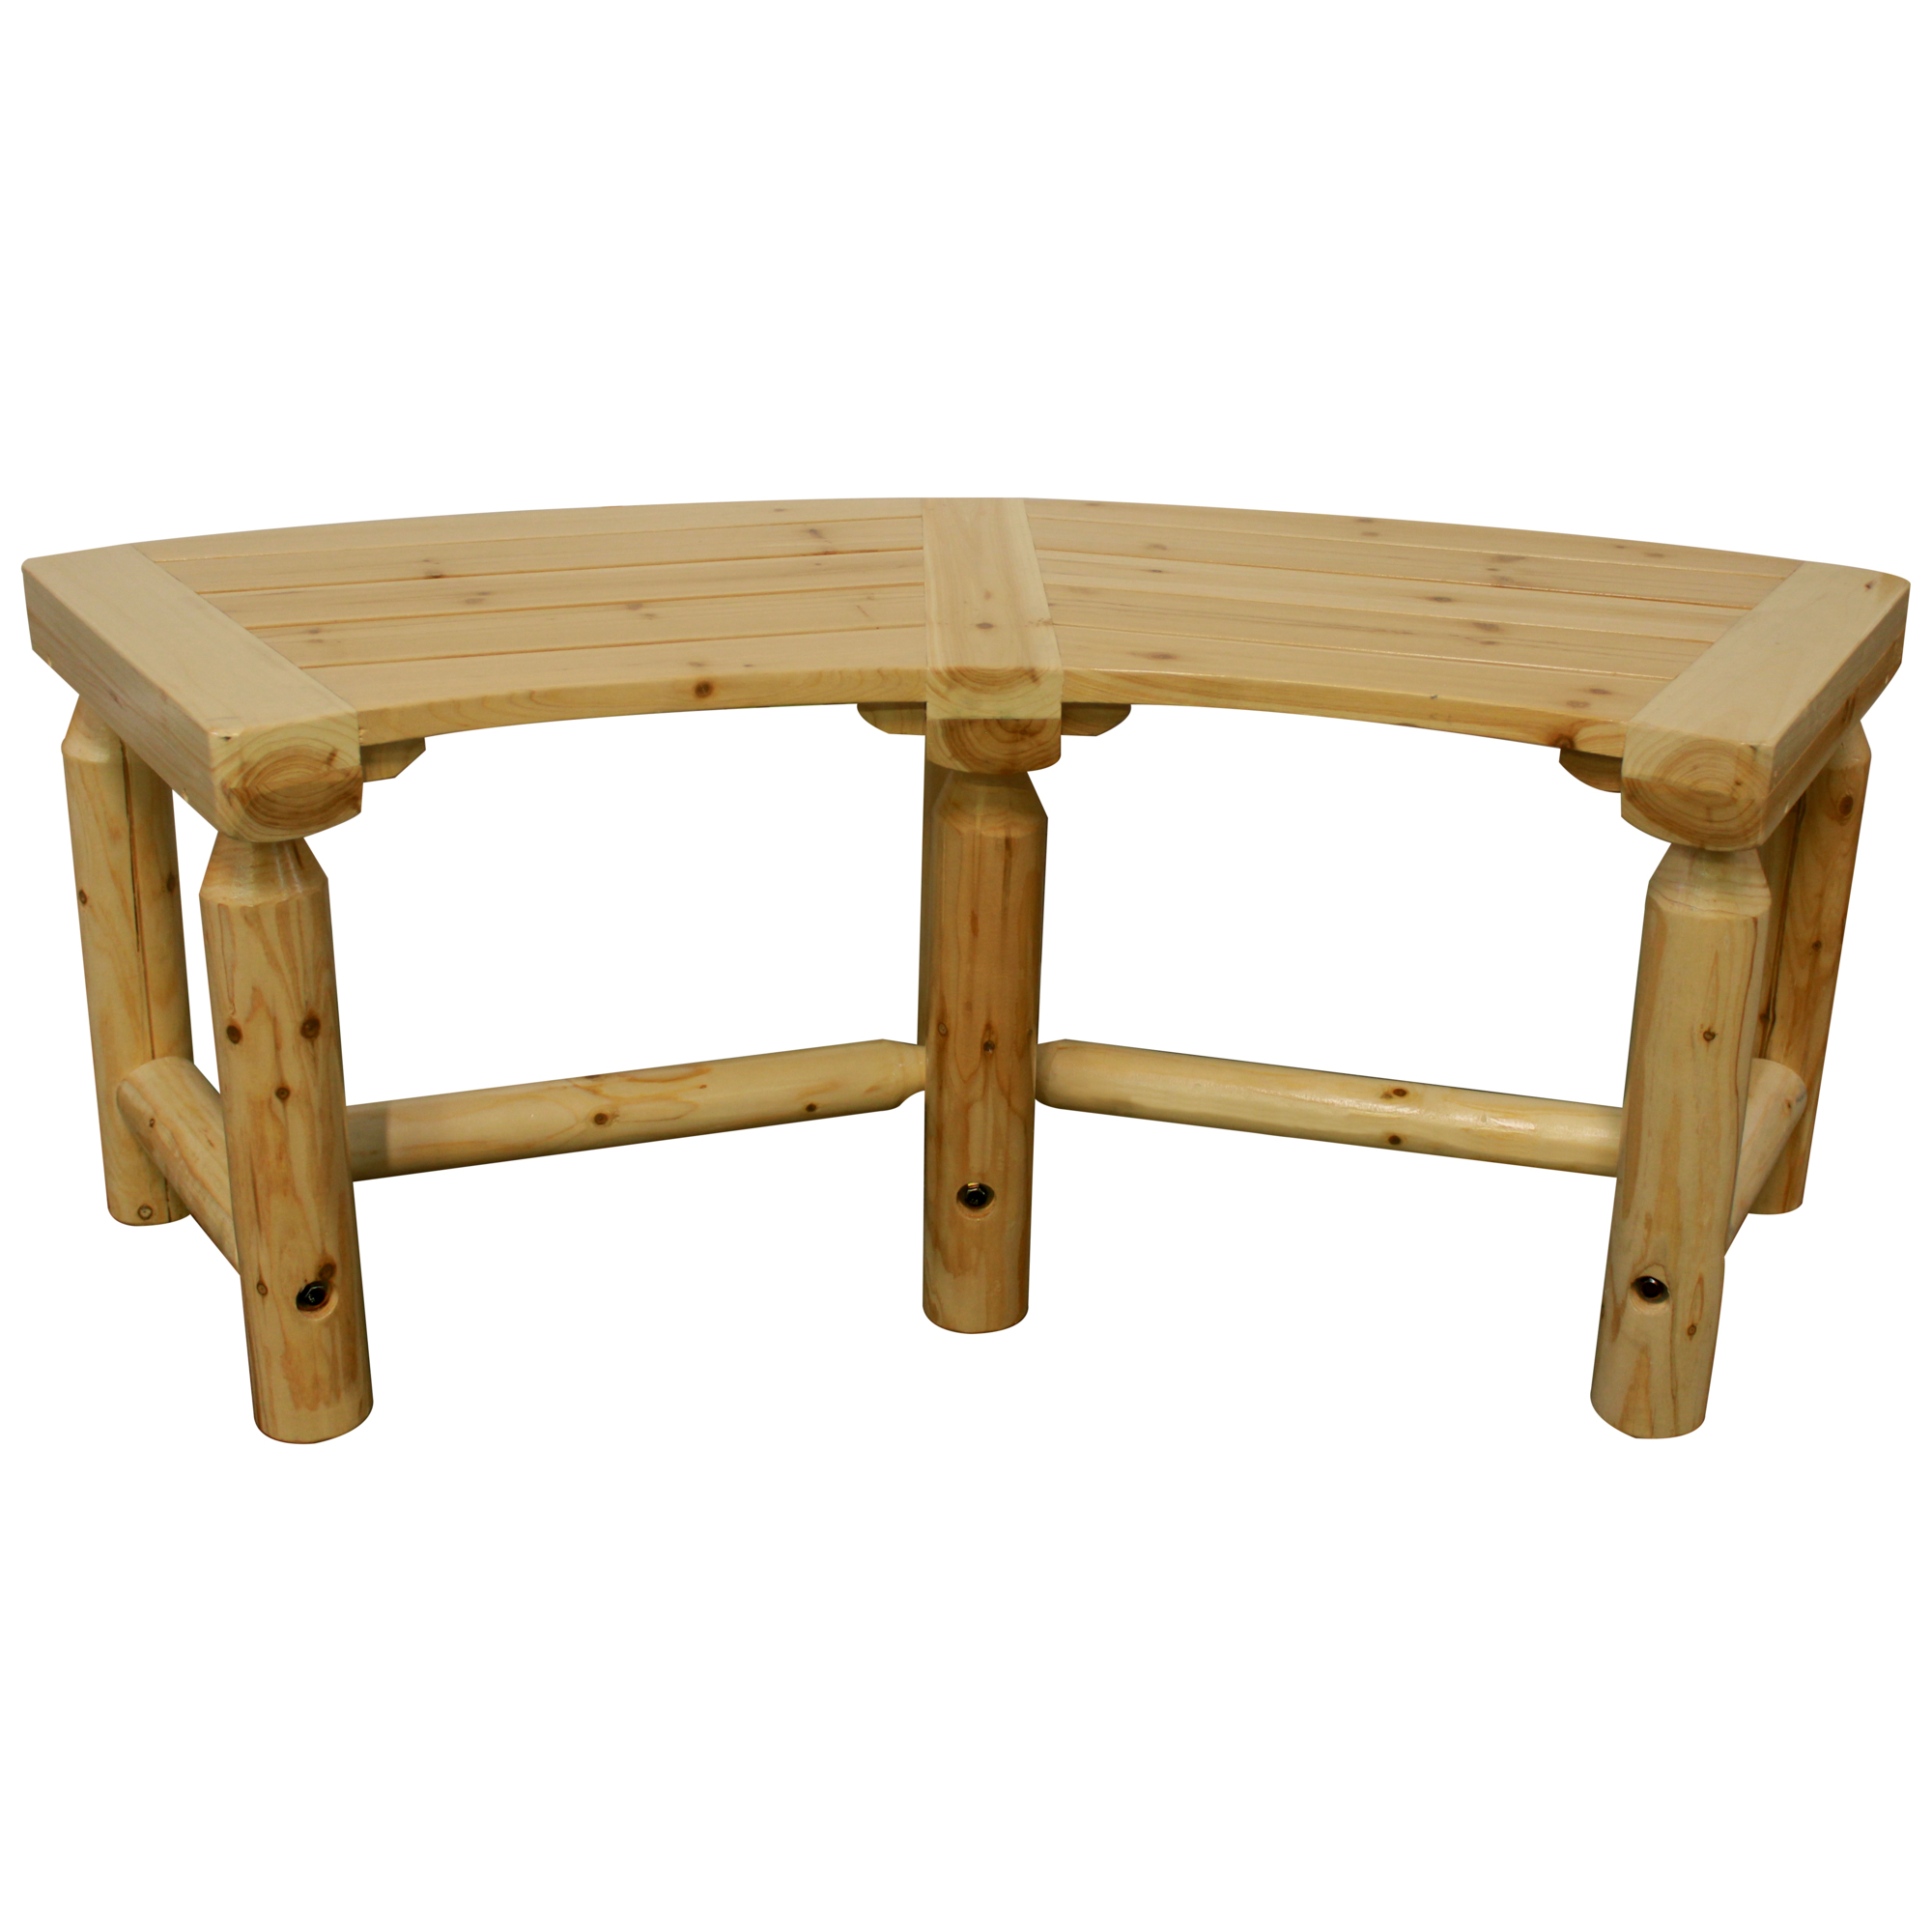 Leigh Country, Aspen Curved Bench, Primary Color Beige, Material Wood, Width 17.52 in, Model TX 95117